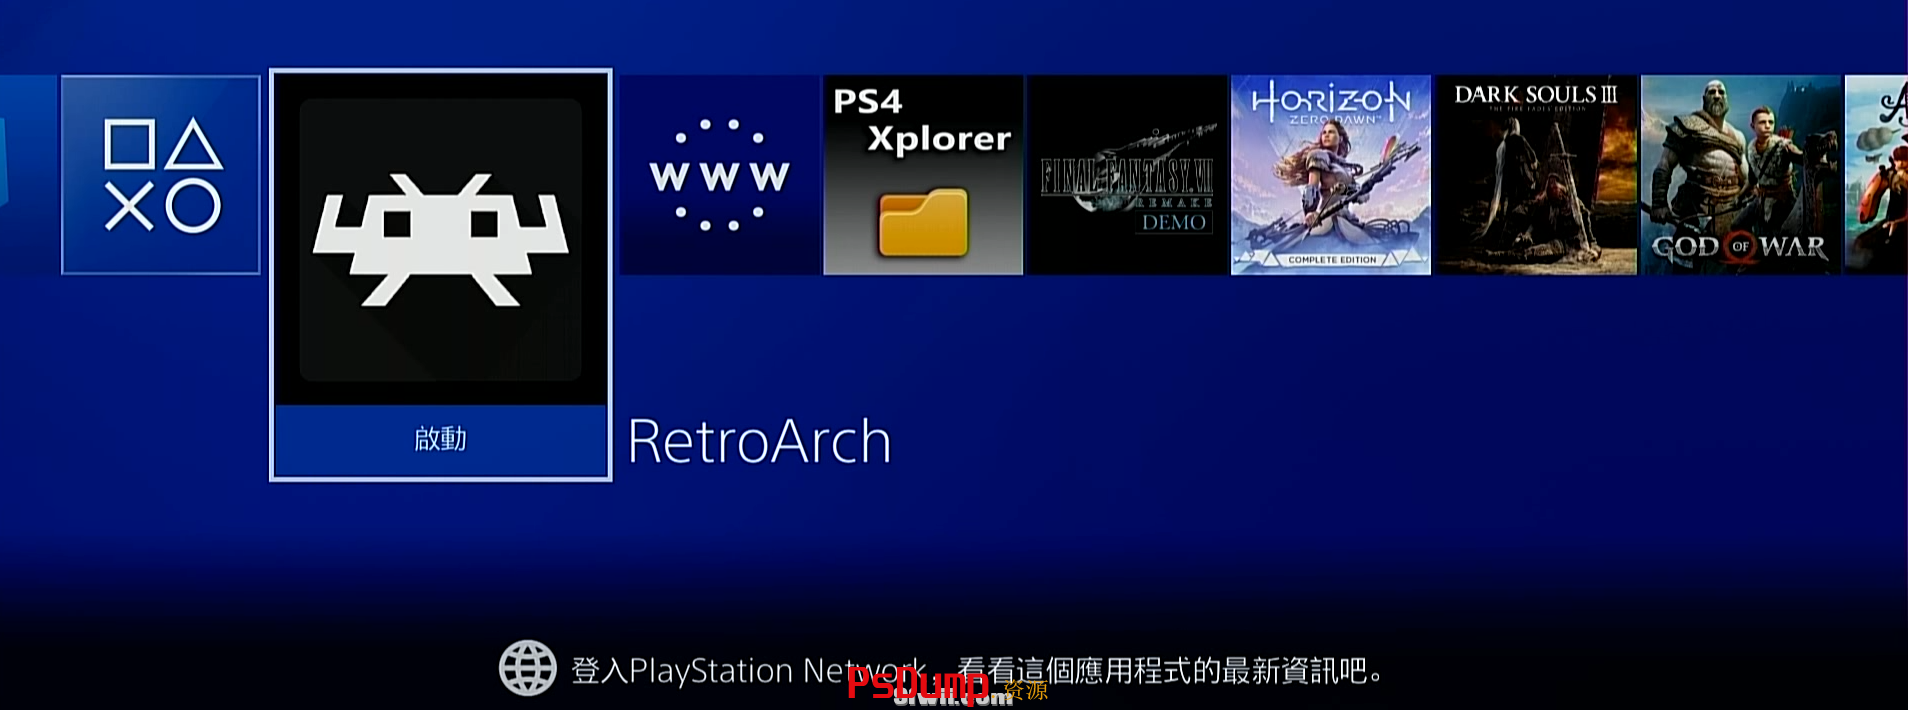 Retroarch for PS4